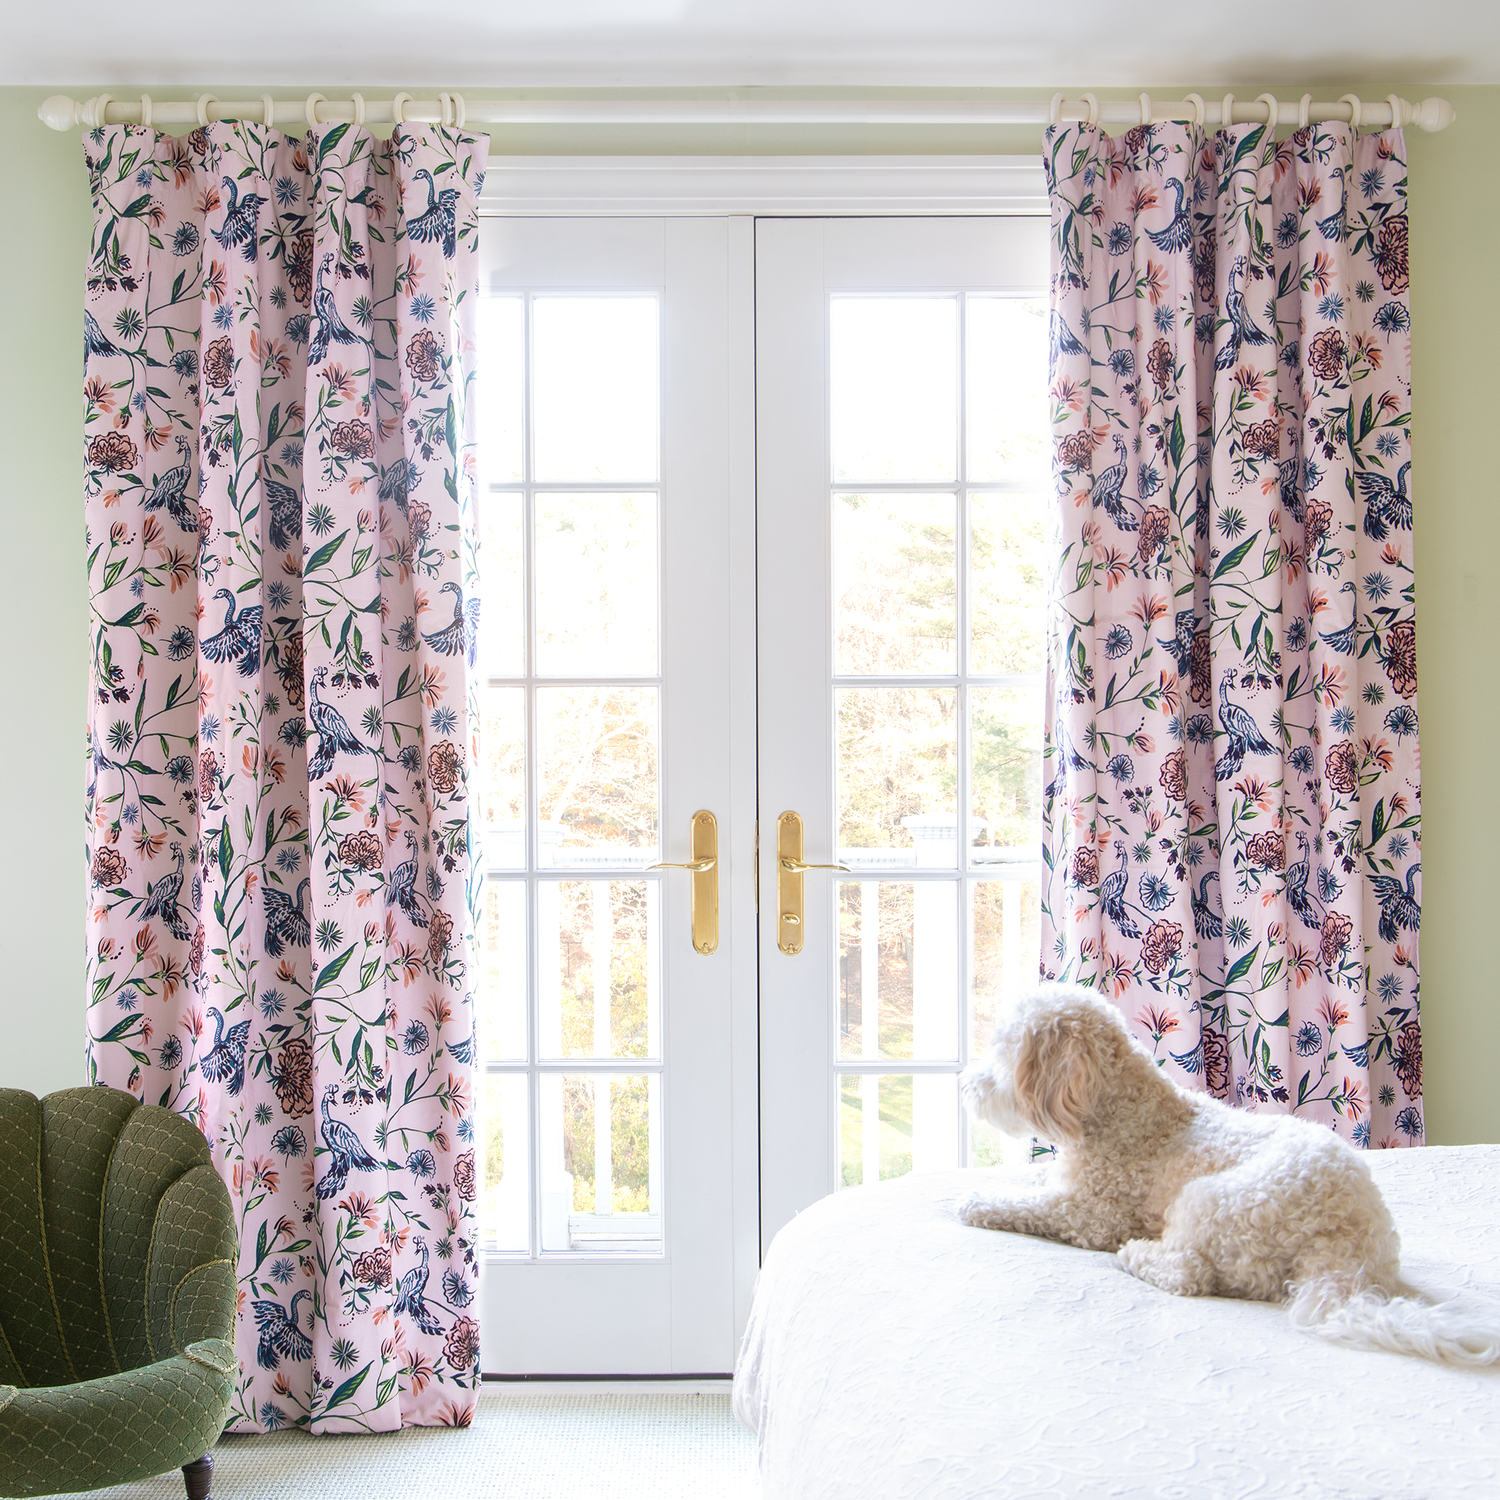 Pink Chinoiserie Printed Curtains hanging from white rod on window in front of dog in white bed and fern velvet sofa chair to the left